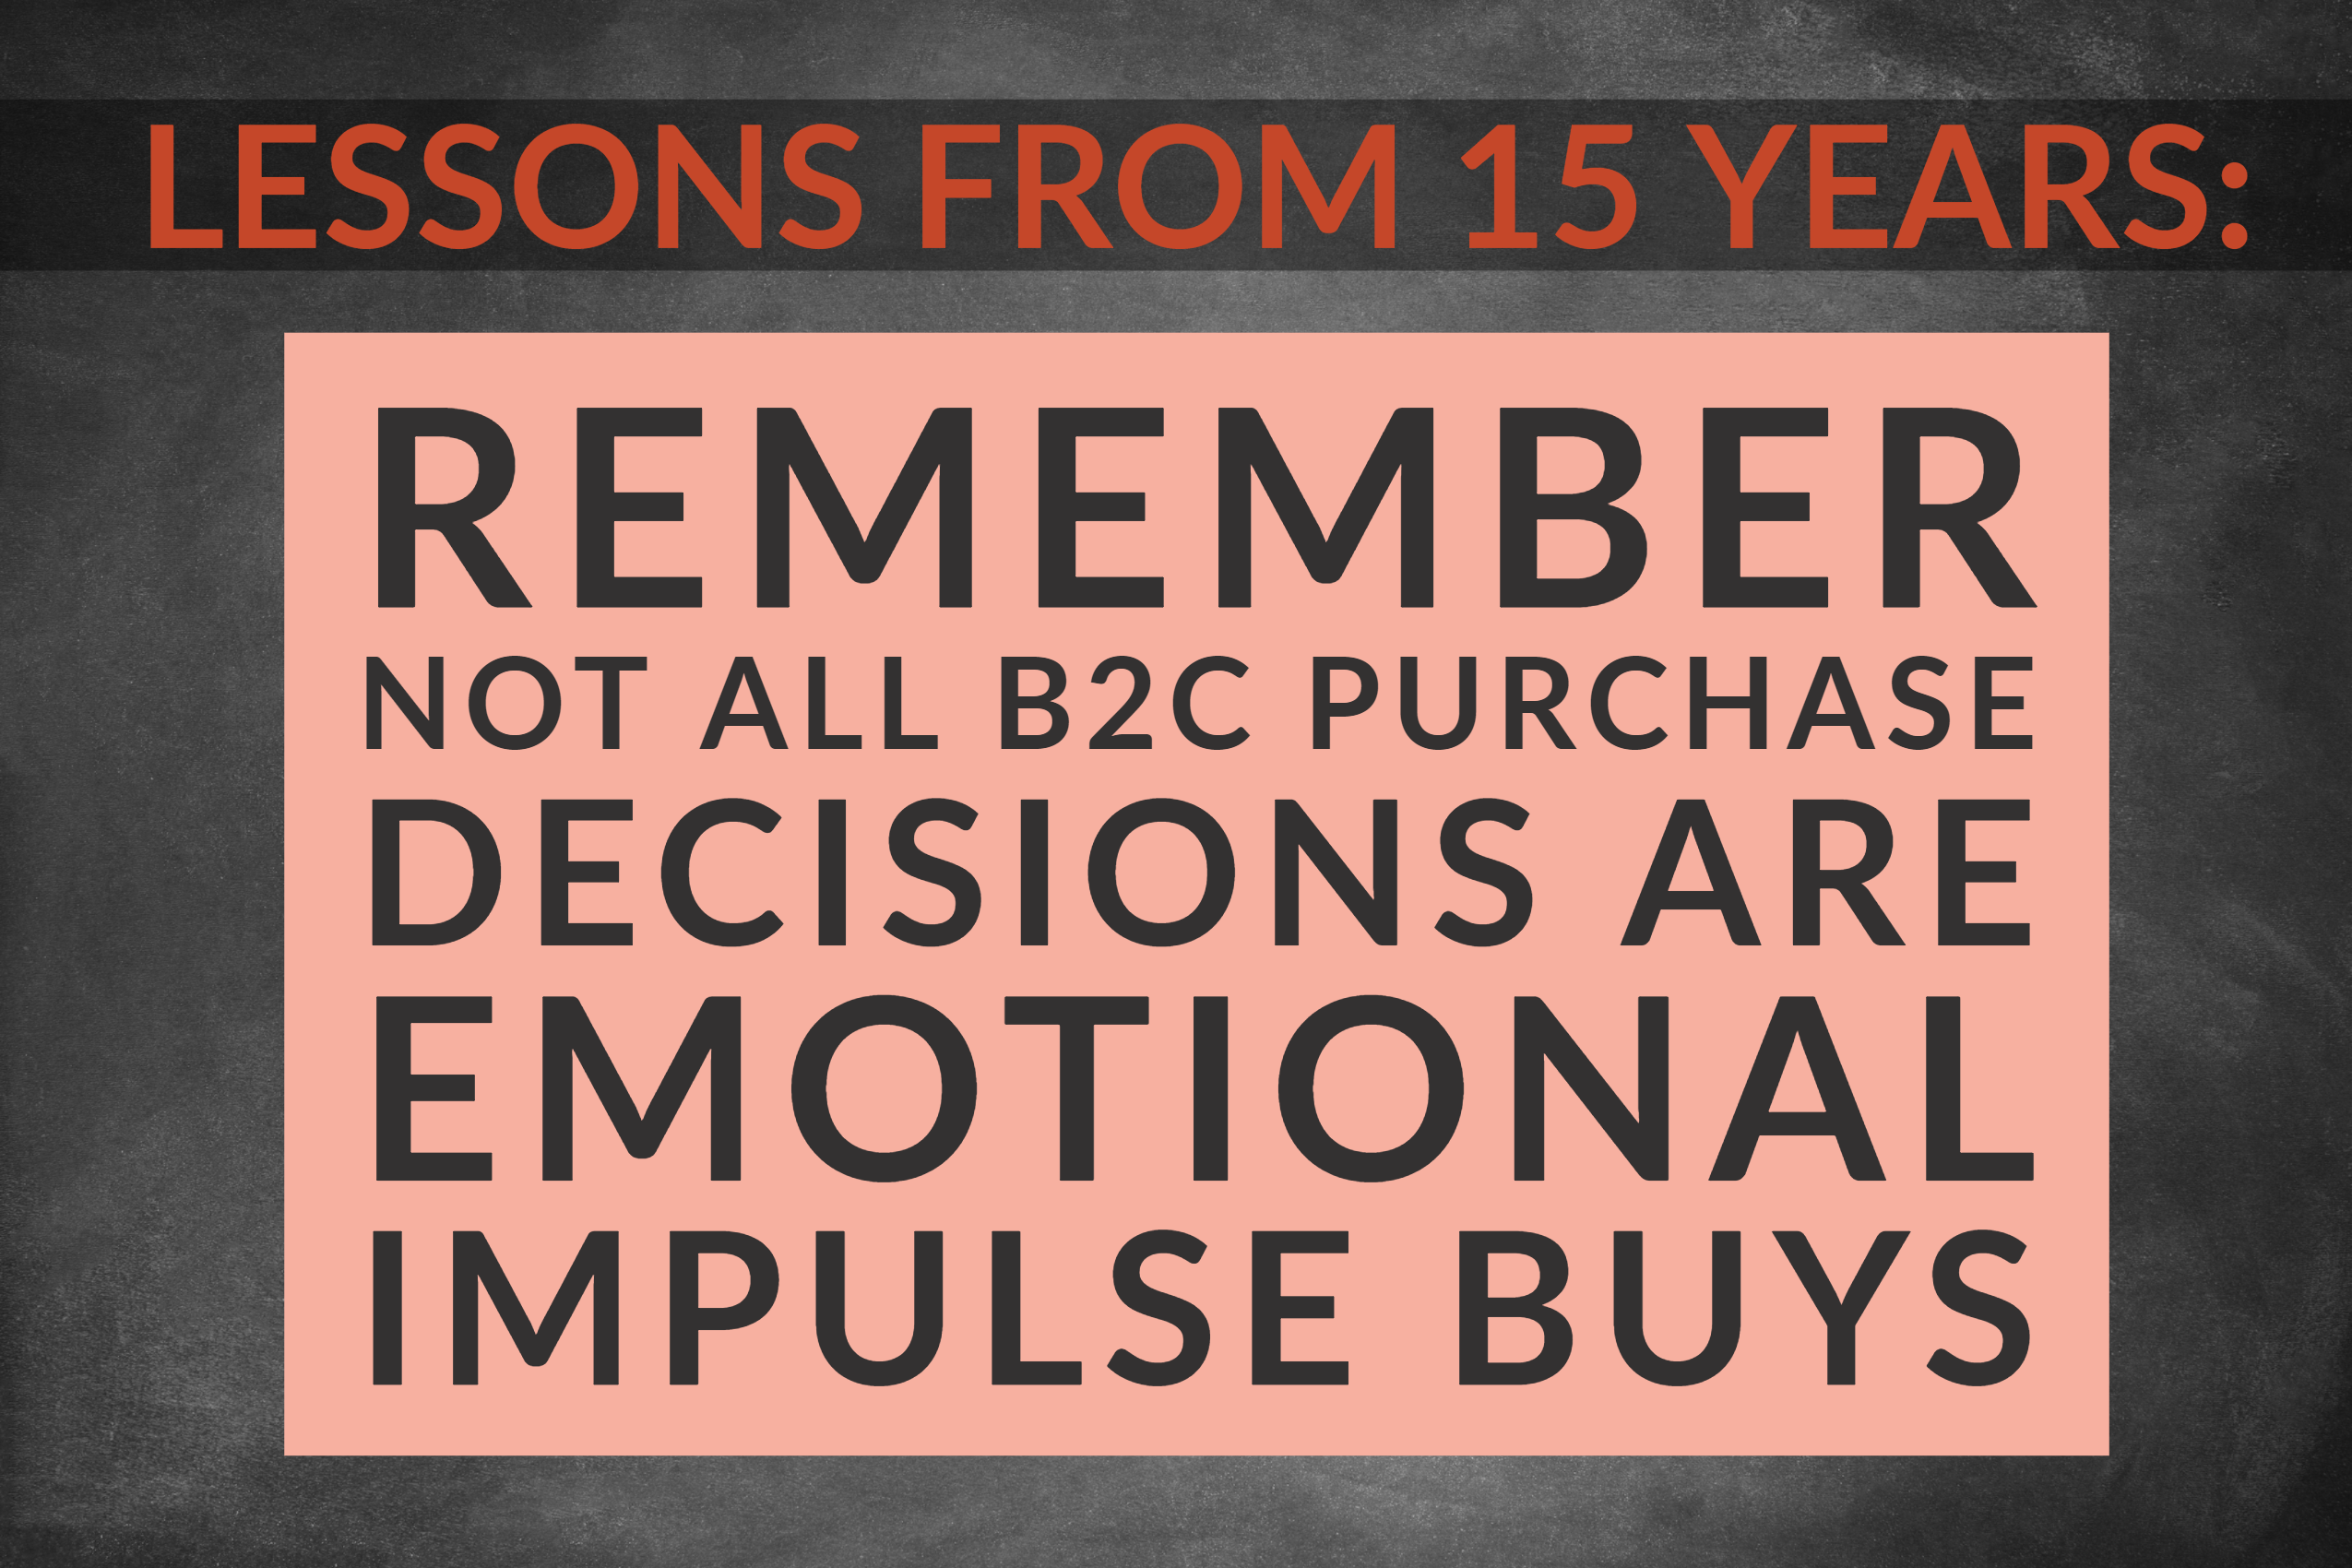 Lessons From 15 Years_ Remember Not All B2C Purchase Decisions Are Emotional Impulse Buys